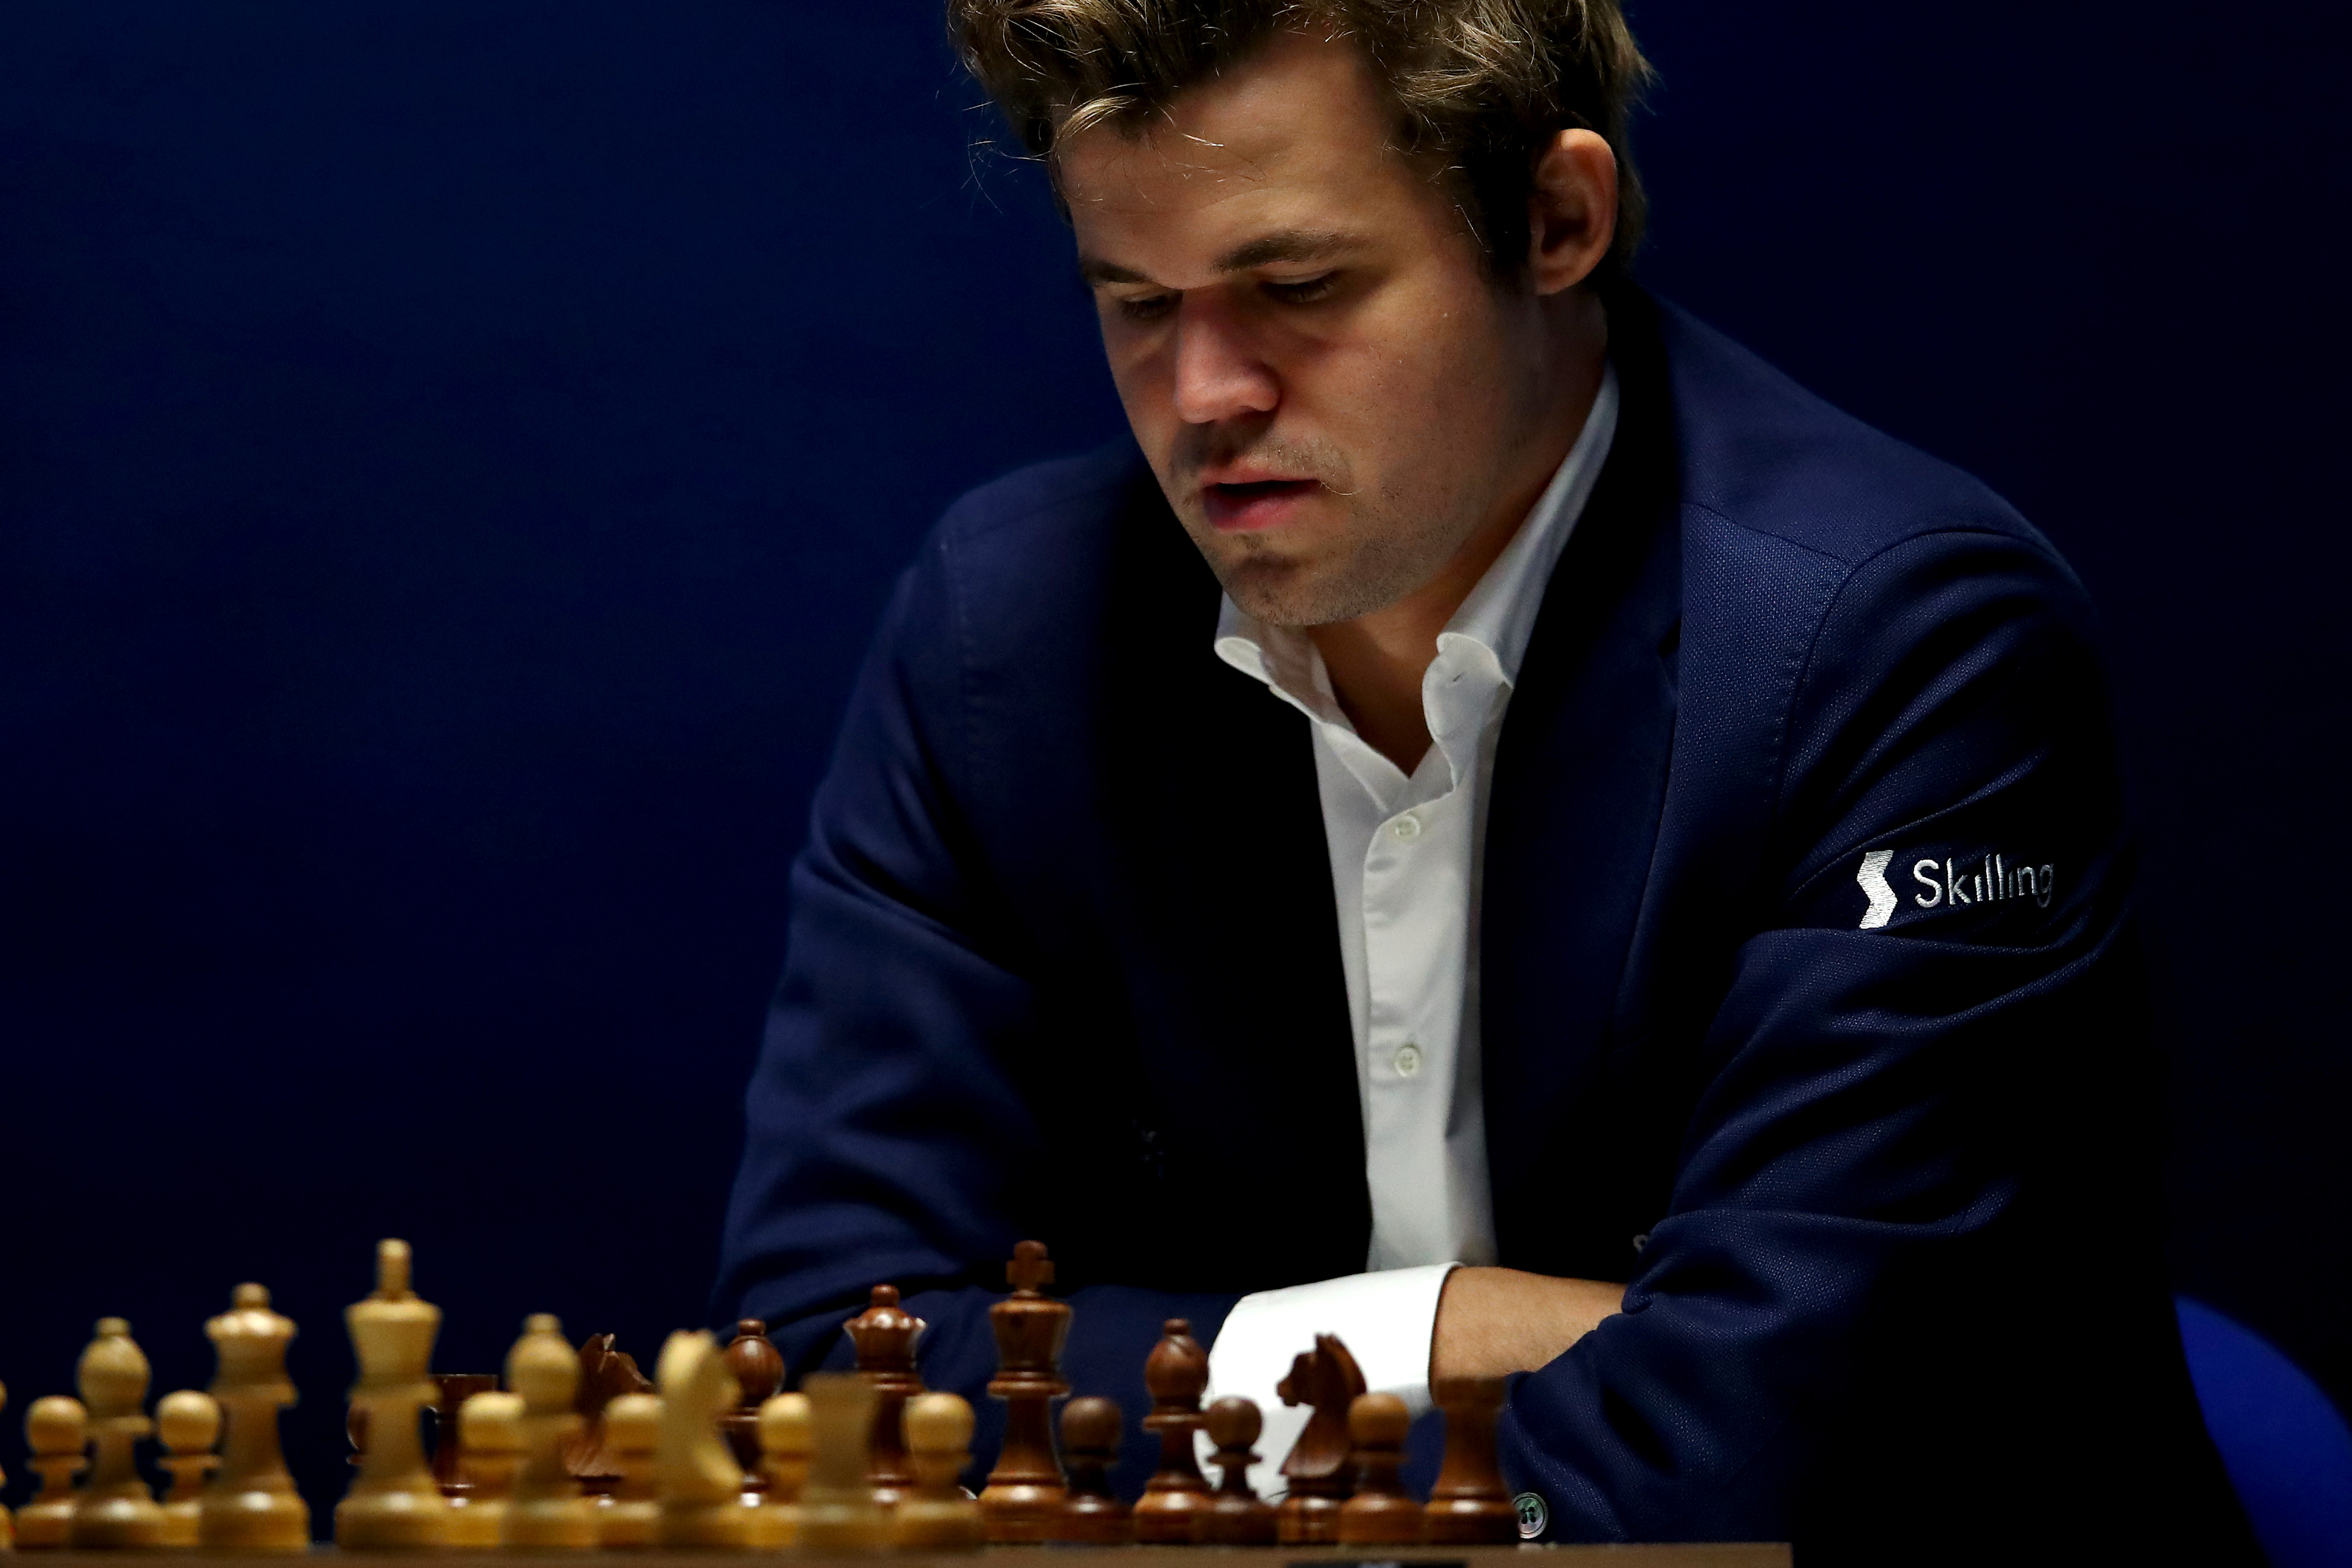 Magnus Carlsen Offers Commentary on Chess Cheating Accusations